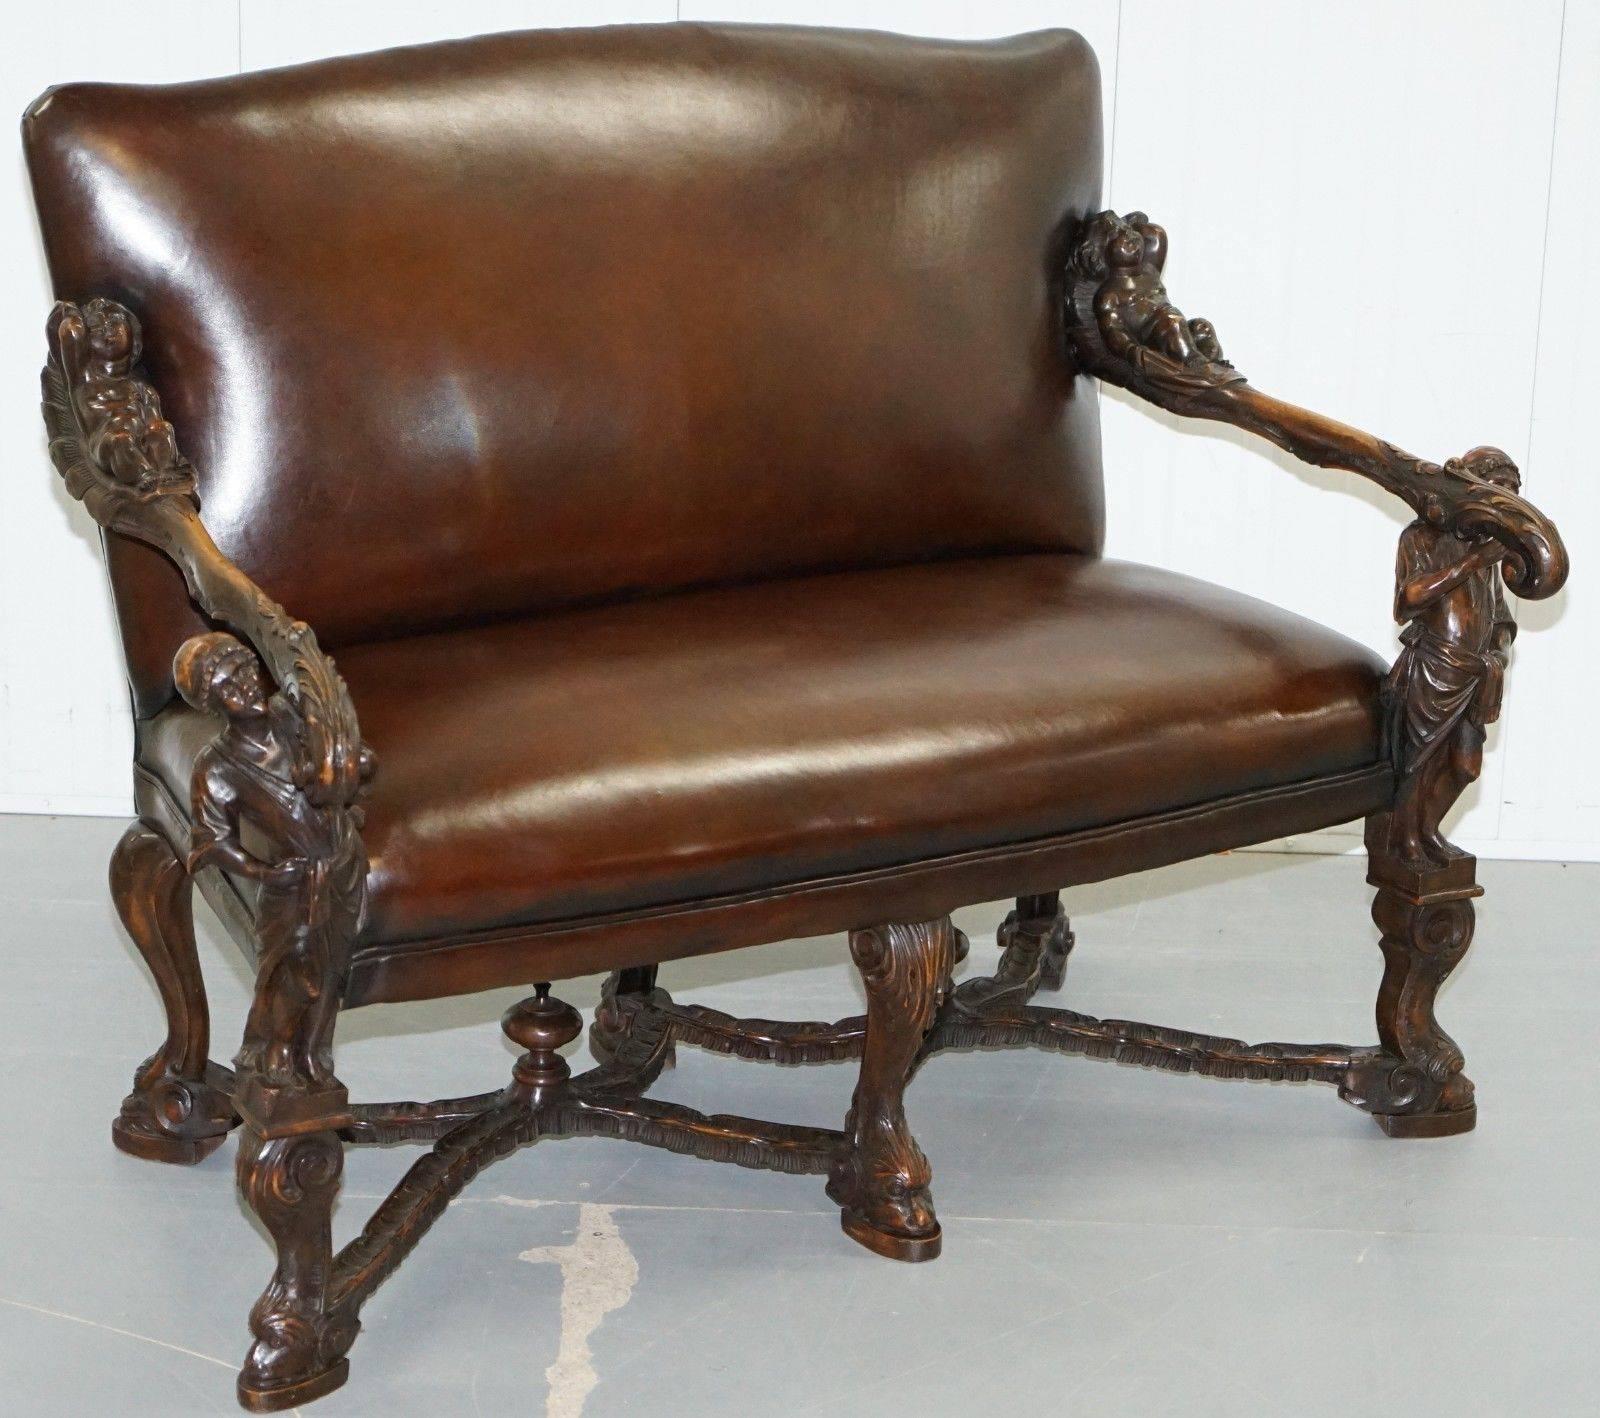 We are delighted to offer for sale this very rare finely carved Venetian Baroque style figural walnut throne settee or bench, attributed to Valentino Panciera Besarel (Venice, 1829-1902) in the manner of Andrea Brustolon (1662-1732).

This piece